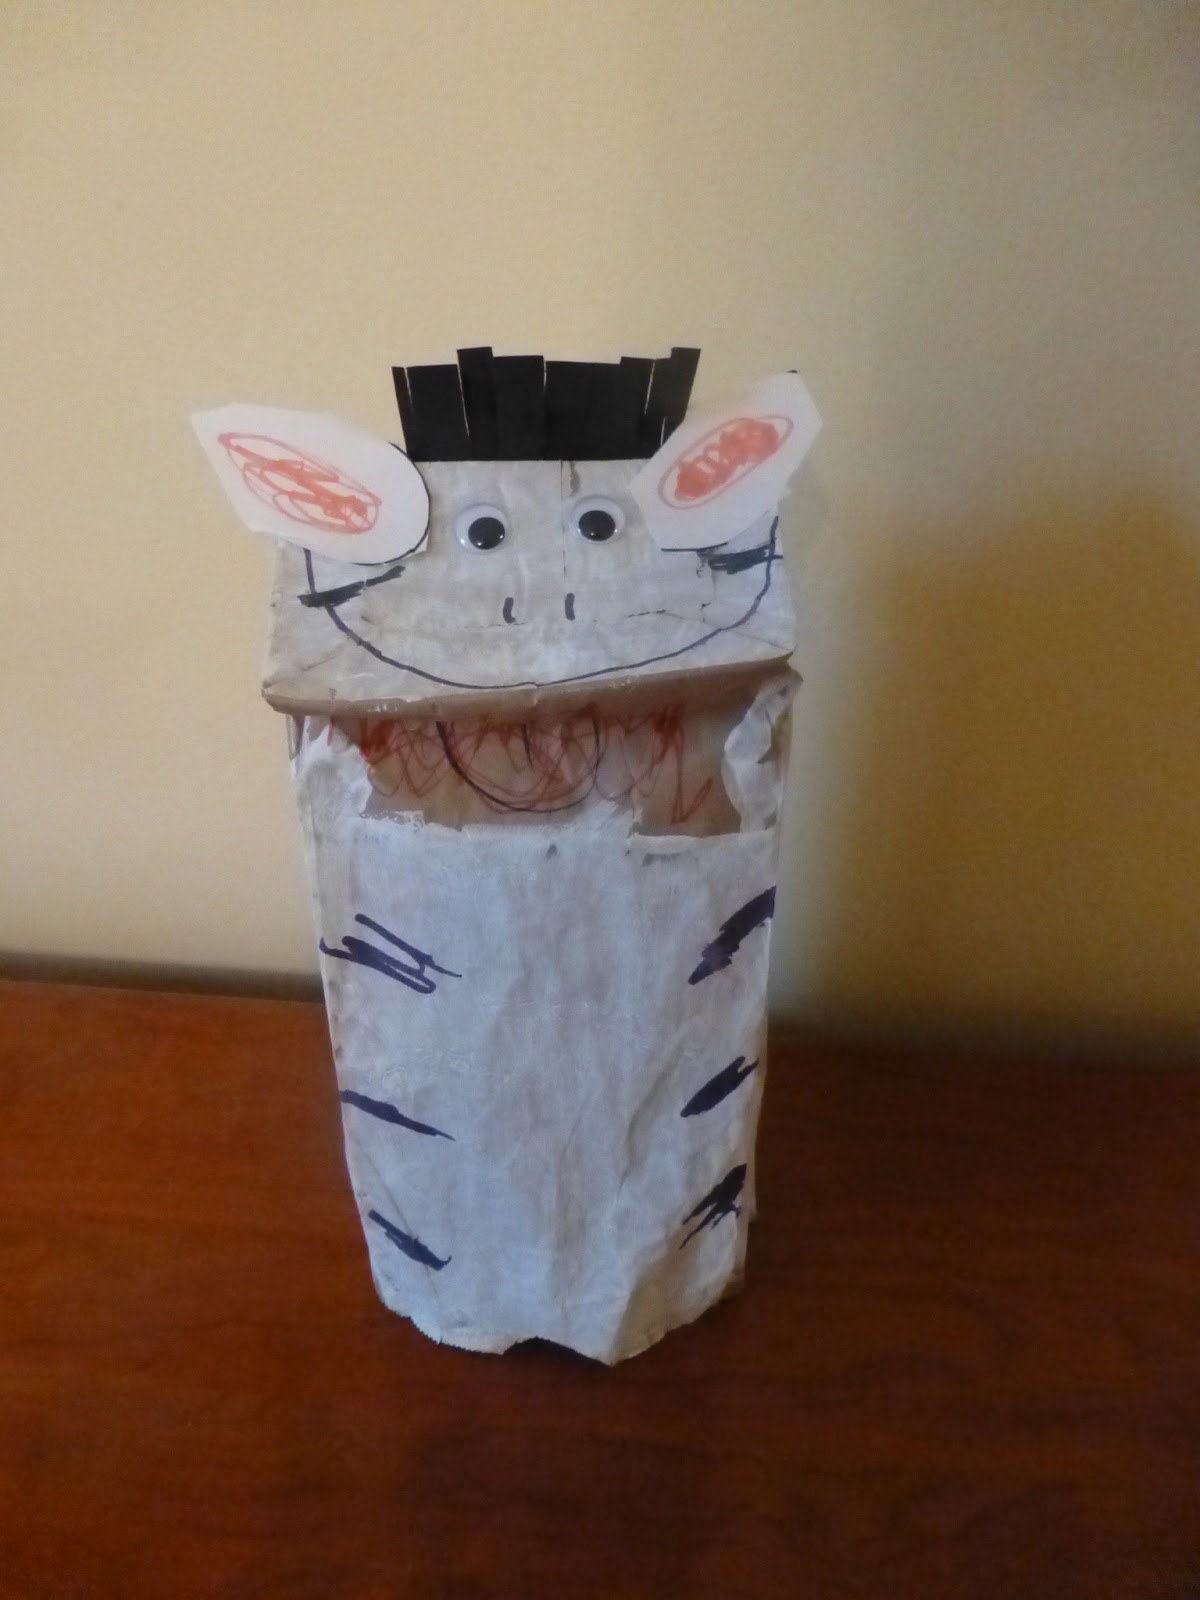 59 Paper Bag Puppets | Guide Patterns